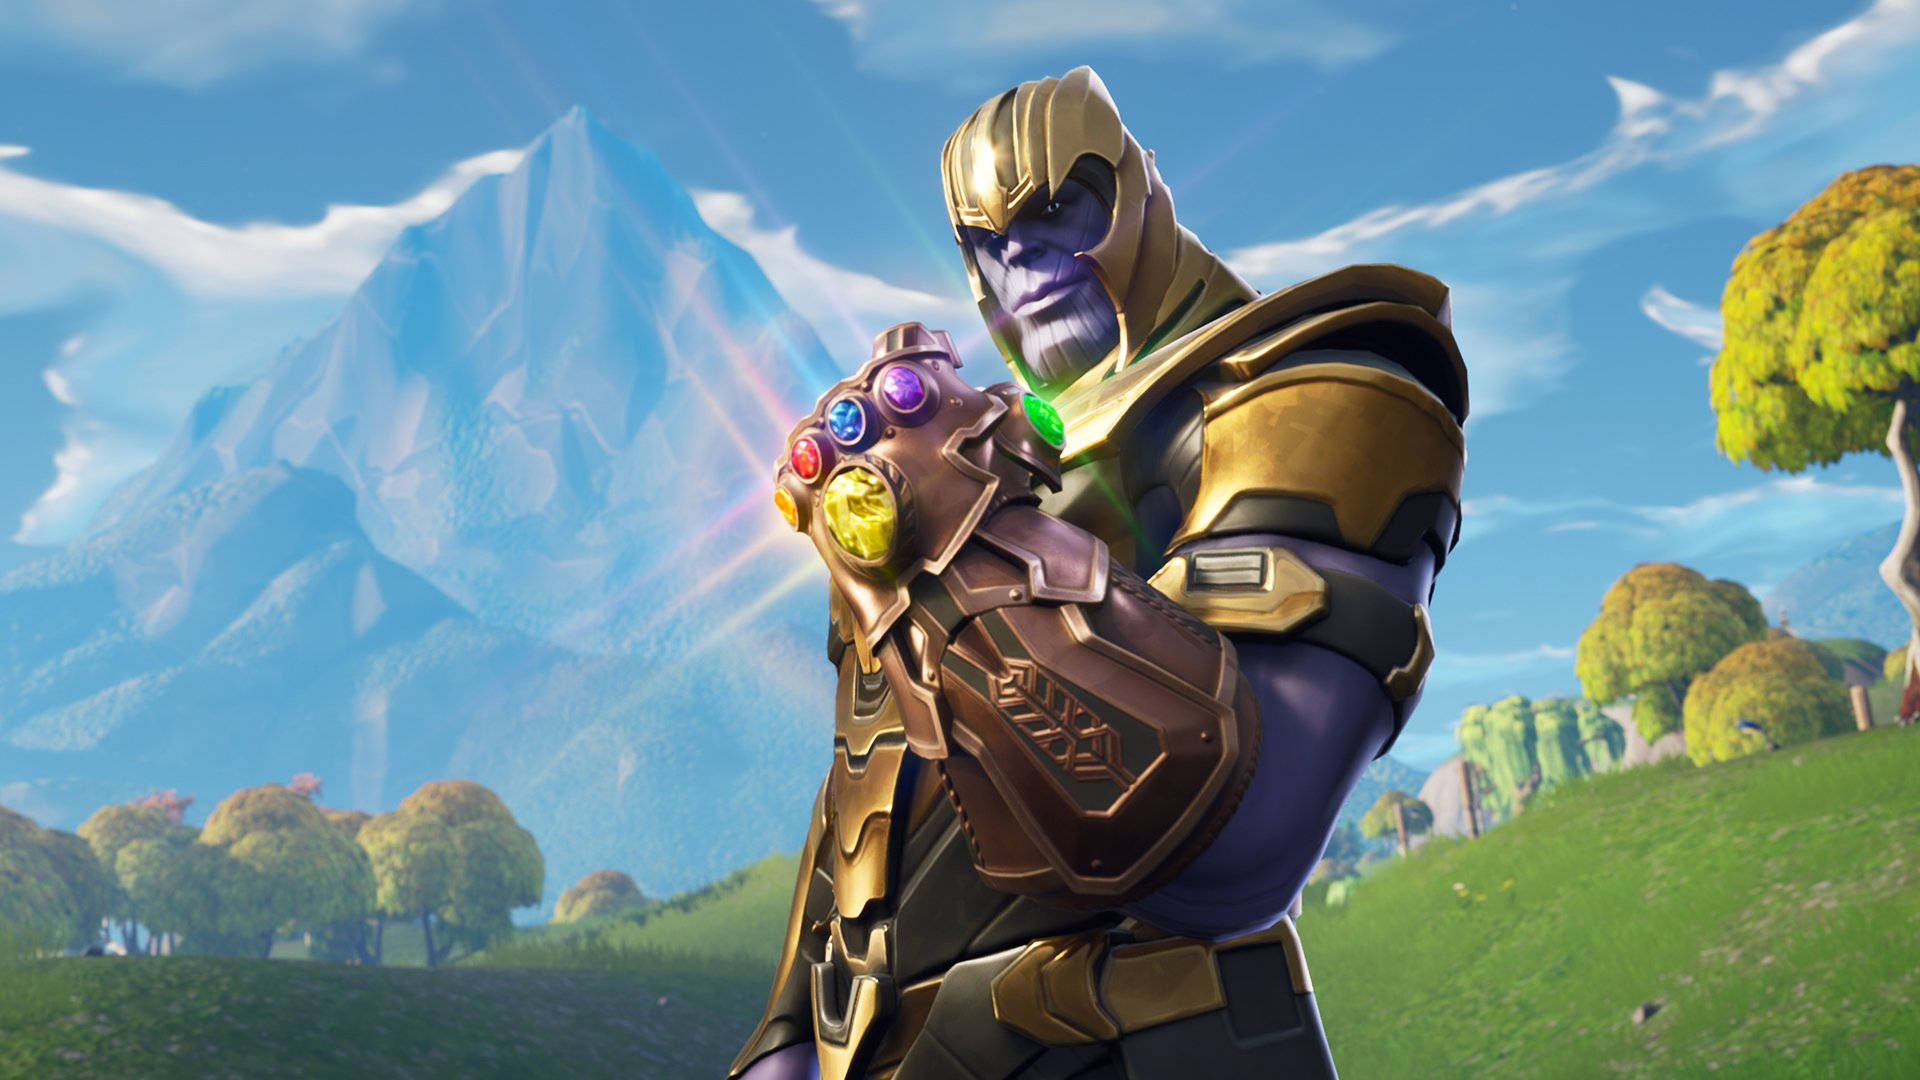 Cool Fortnite And Marvel Crossover Wallpaper